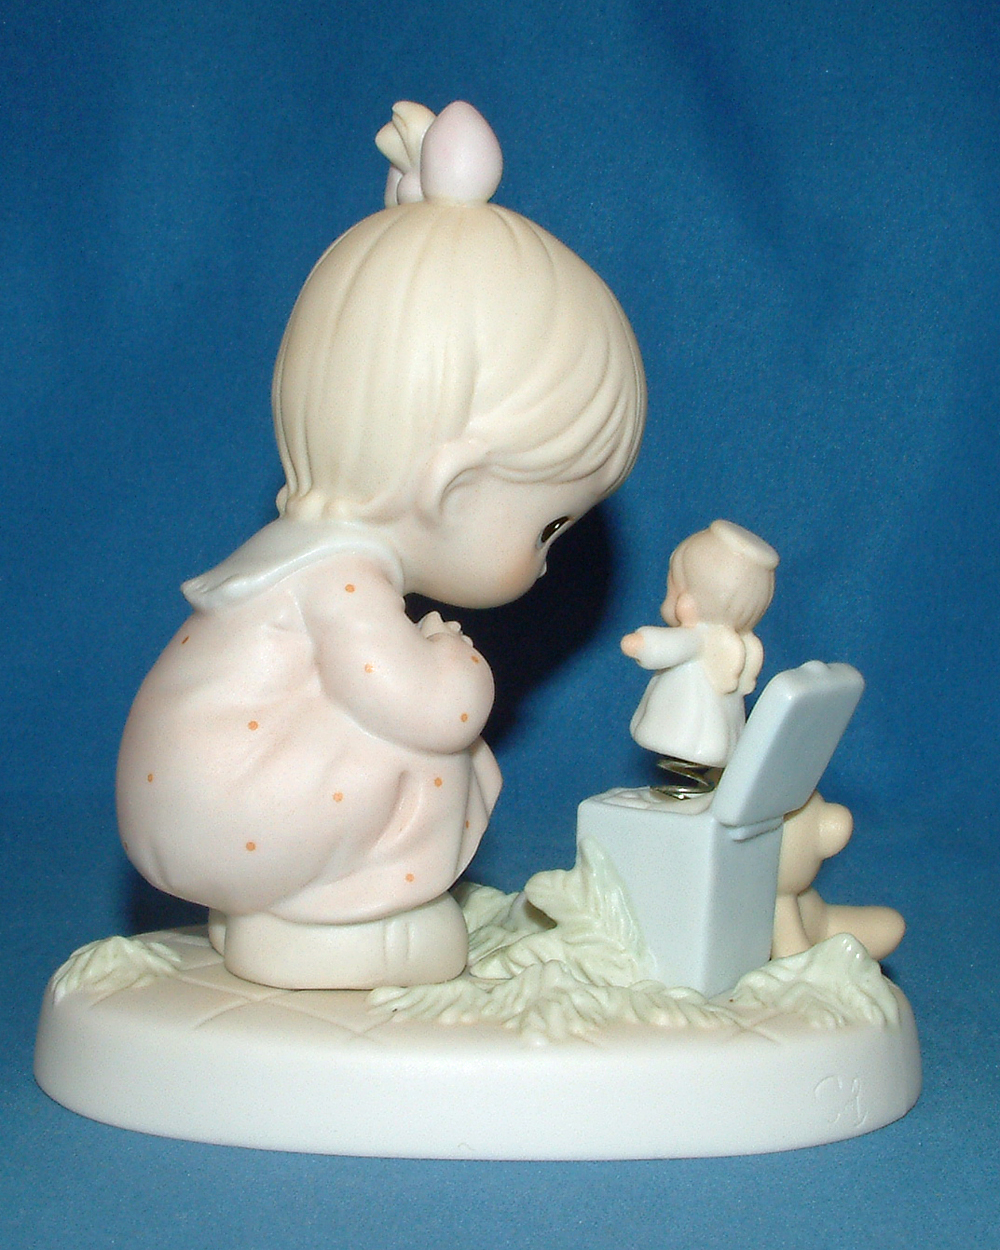 Precious Moments Figurine: 523755 Just Poppin' in to Say Halo! (5") - image 2 of 3